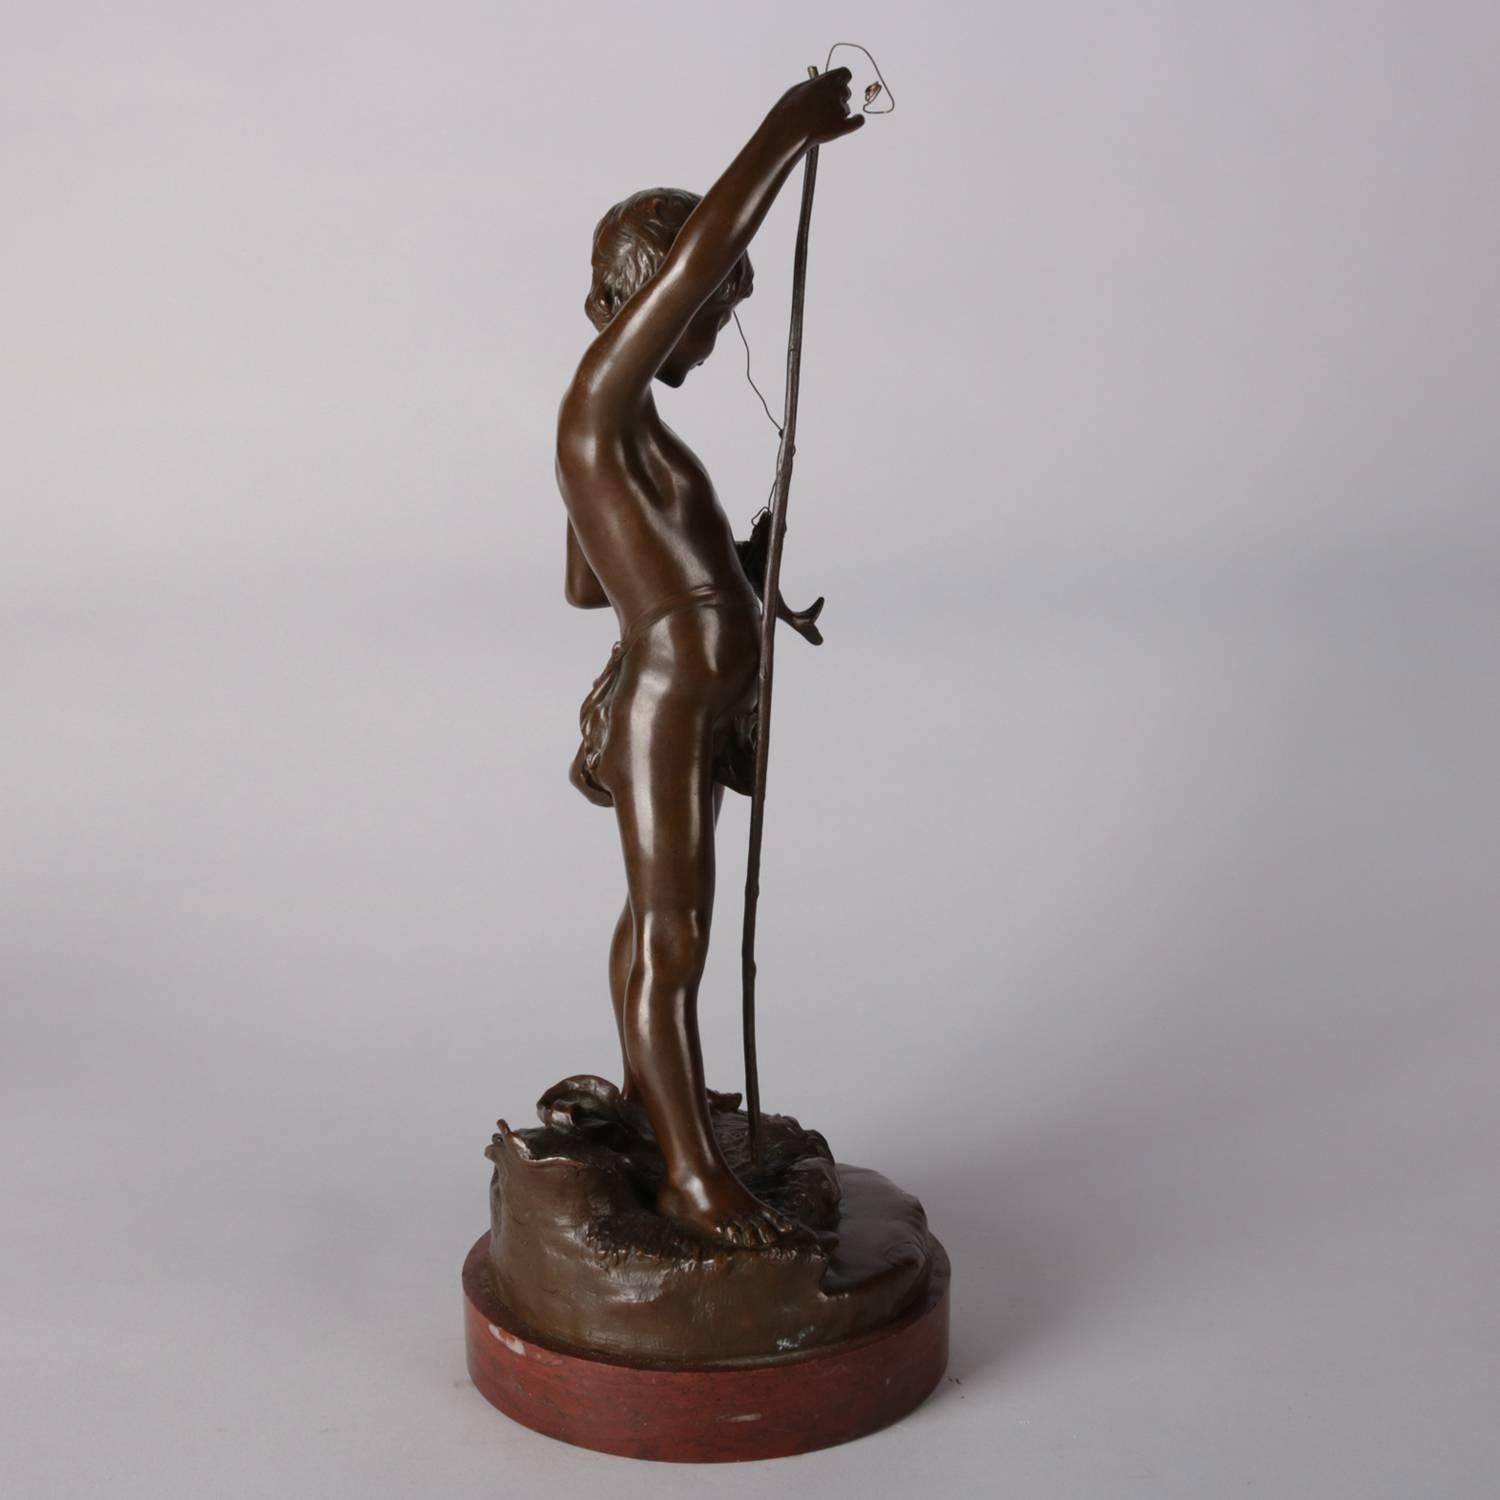 Antique Figural Bronze Sculpture of Boy Fishing Signed A. Rupell, 19th Century 3